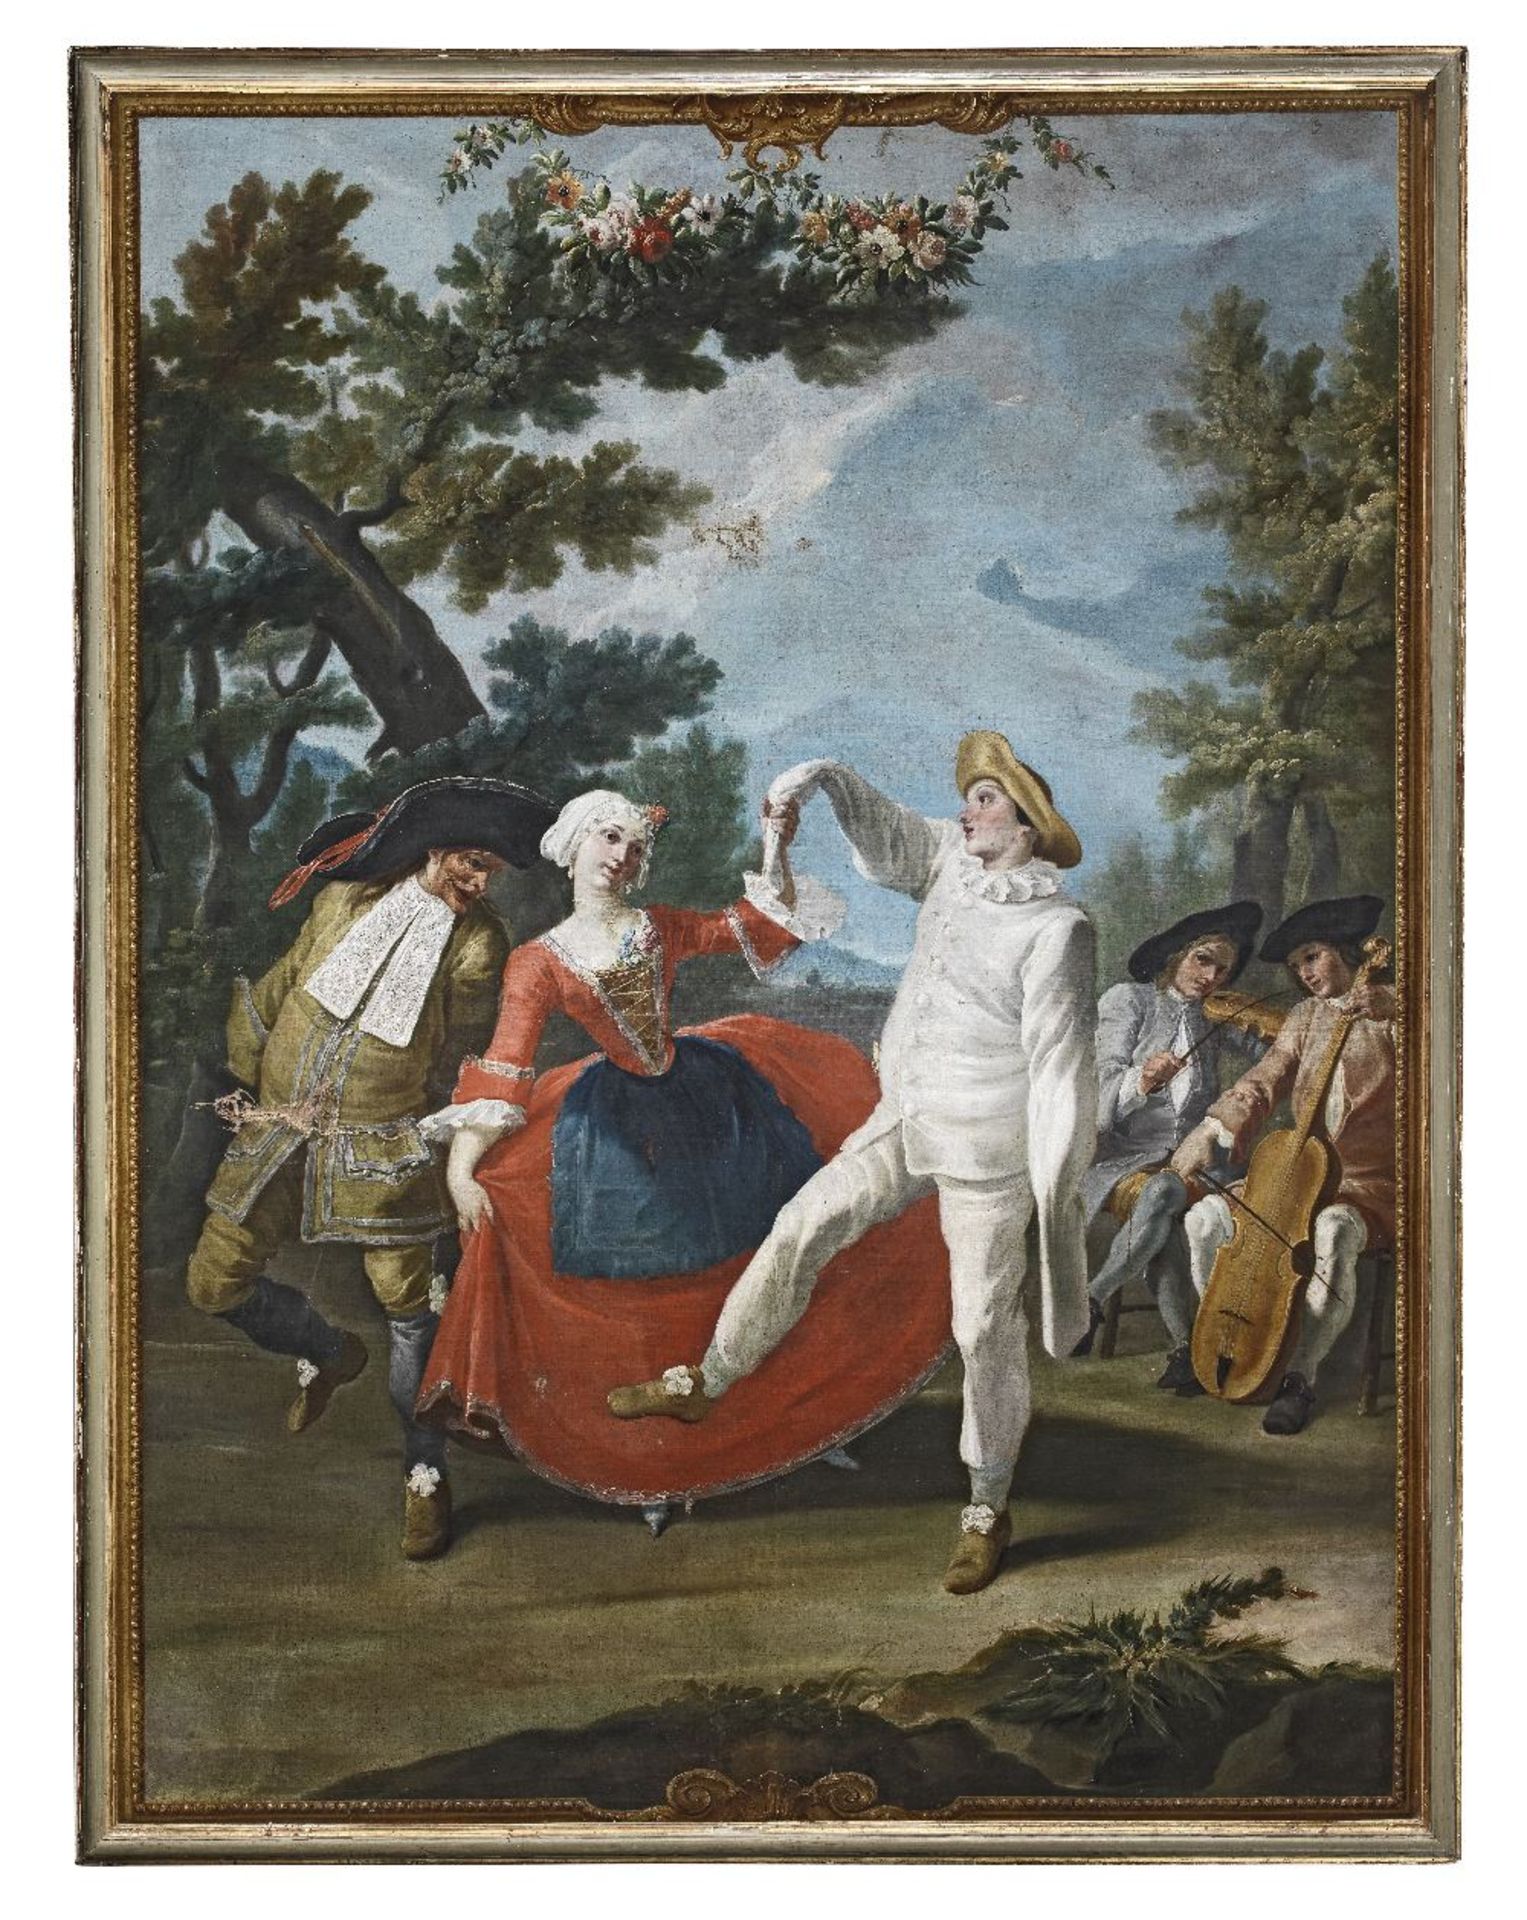 Attributed to Filippo Falciatore (Naples 1718-1768) Figures from the Commedia dell'arte dancing - Image 6 of 8